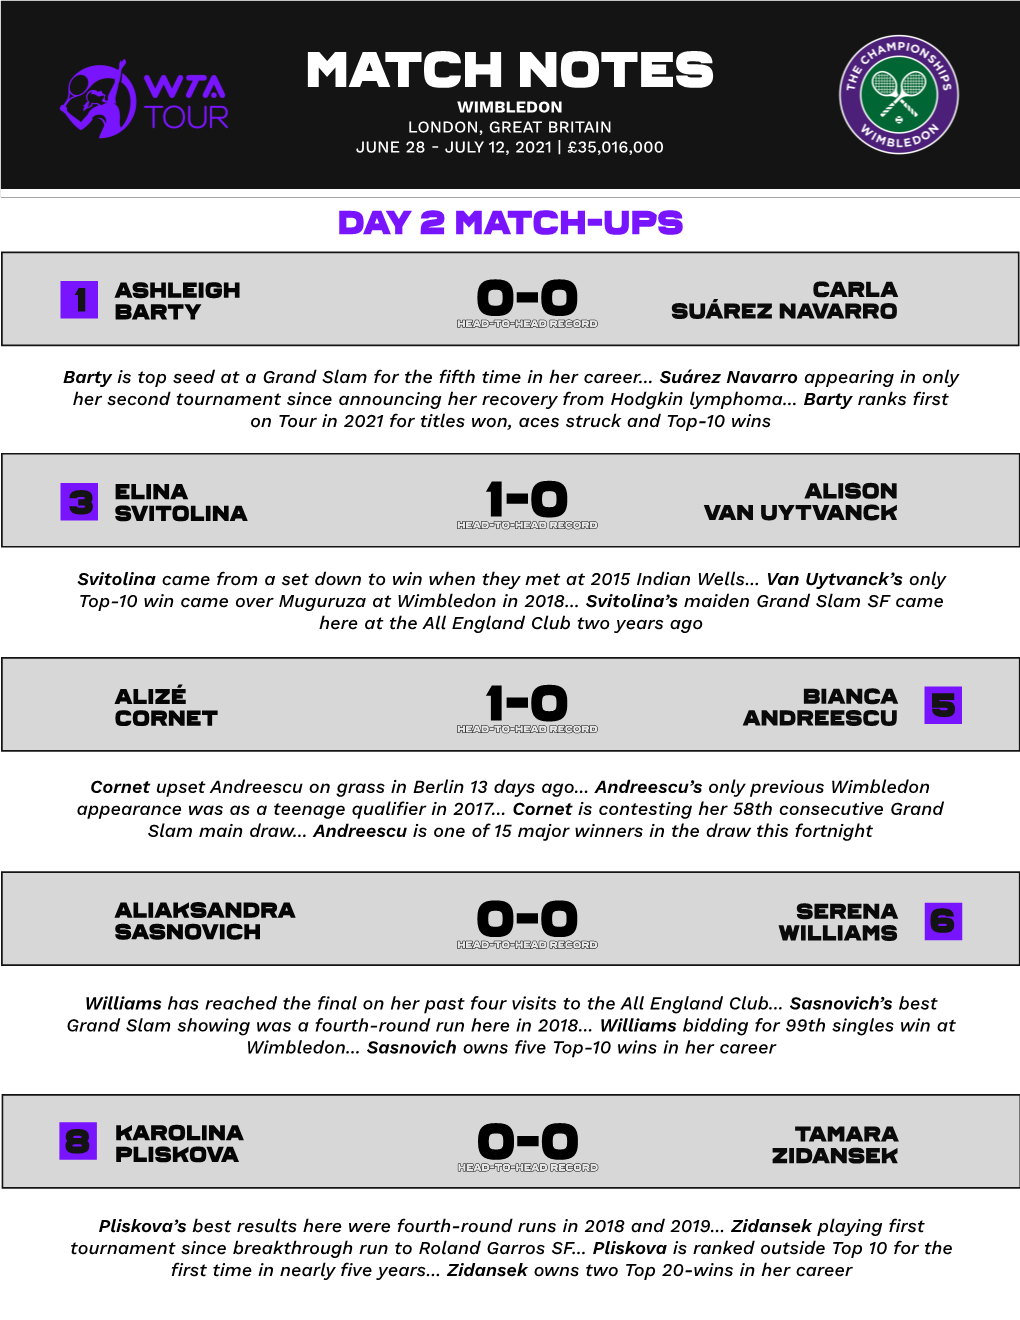 Match Notes 0-0 1-0 1-0 0-0